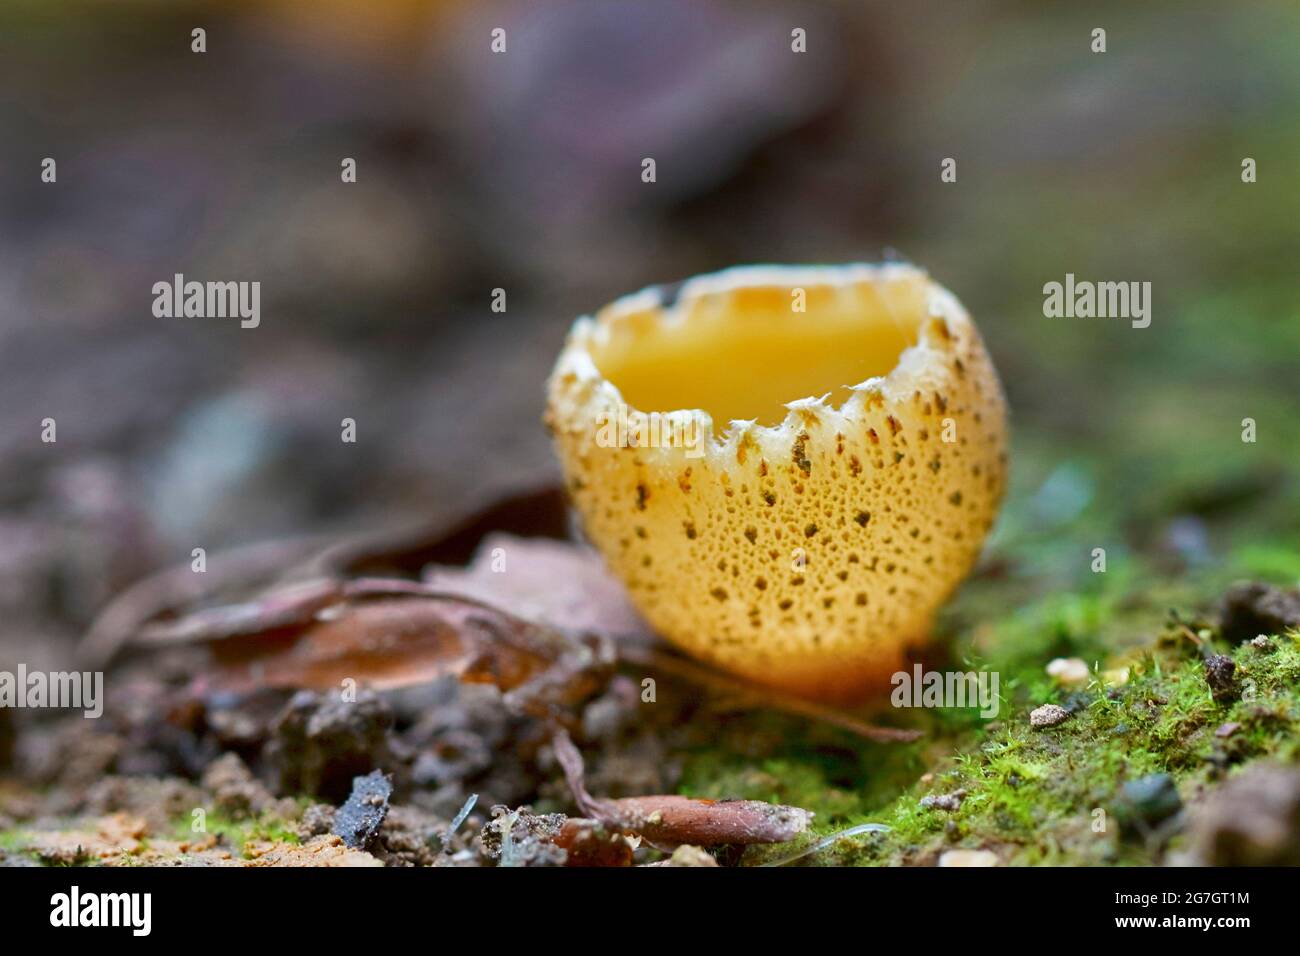 blistered cup (Peziza vesiculosa), fruiting bodies on forest floor, Germany, North Rhine-Westphalia Stock Photo